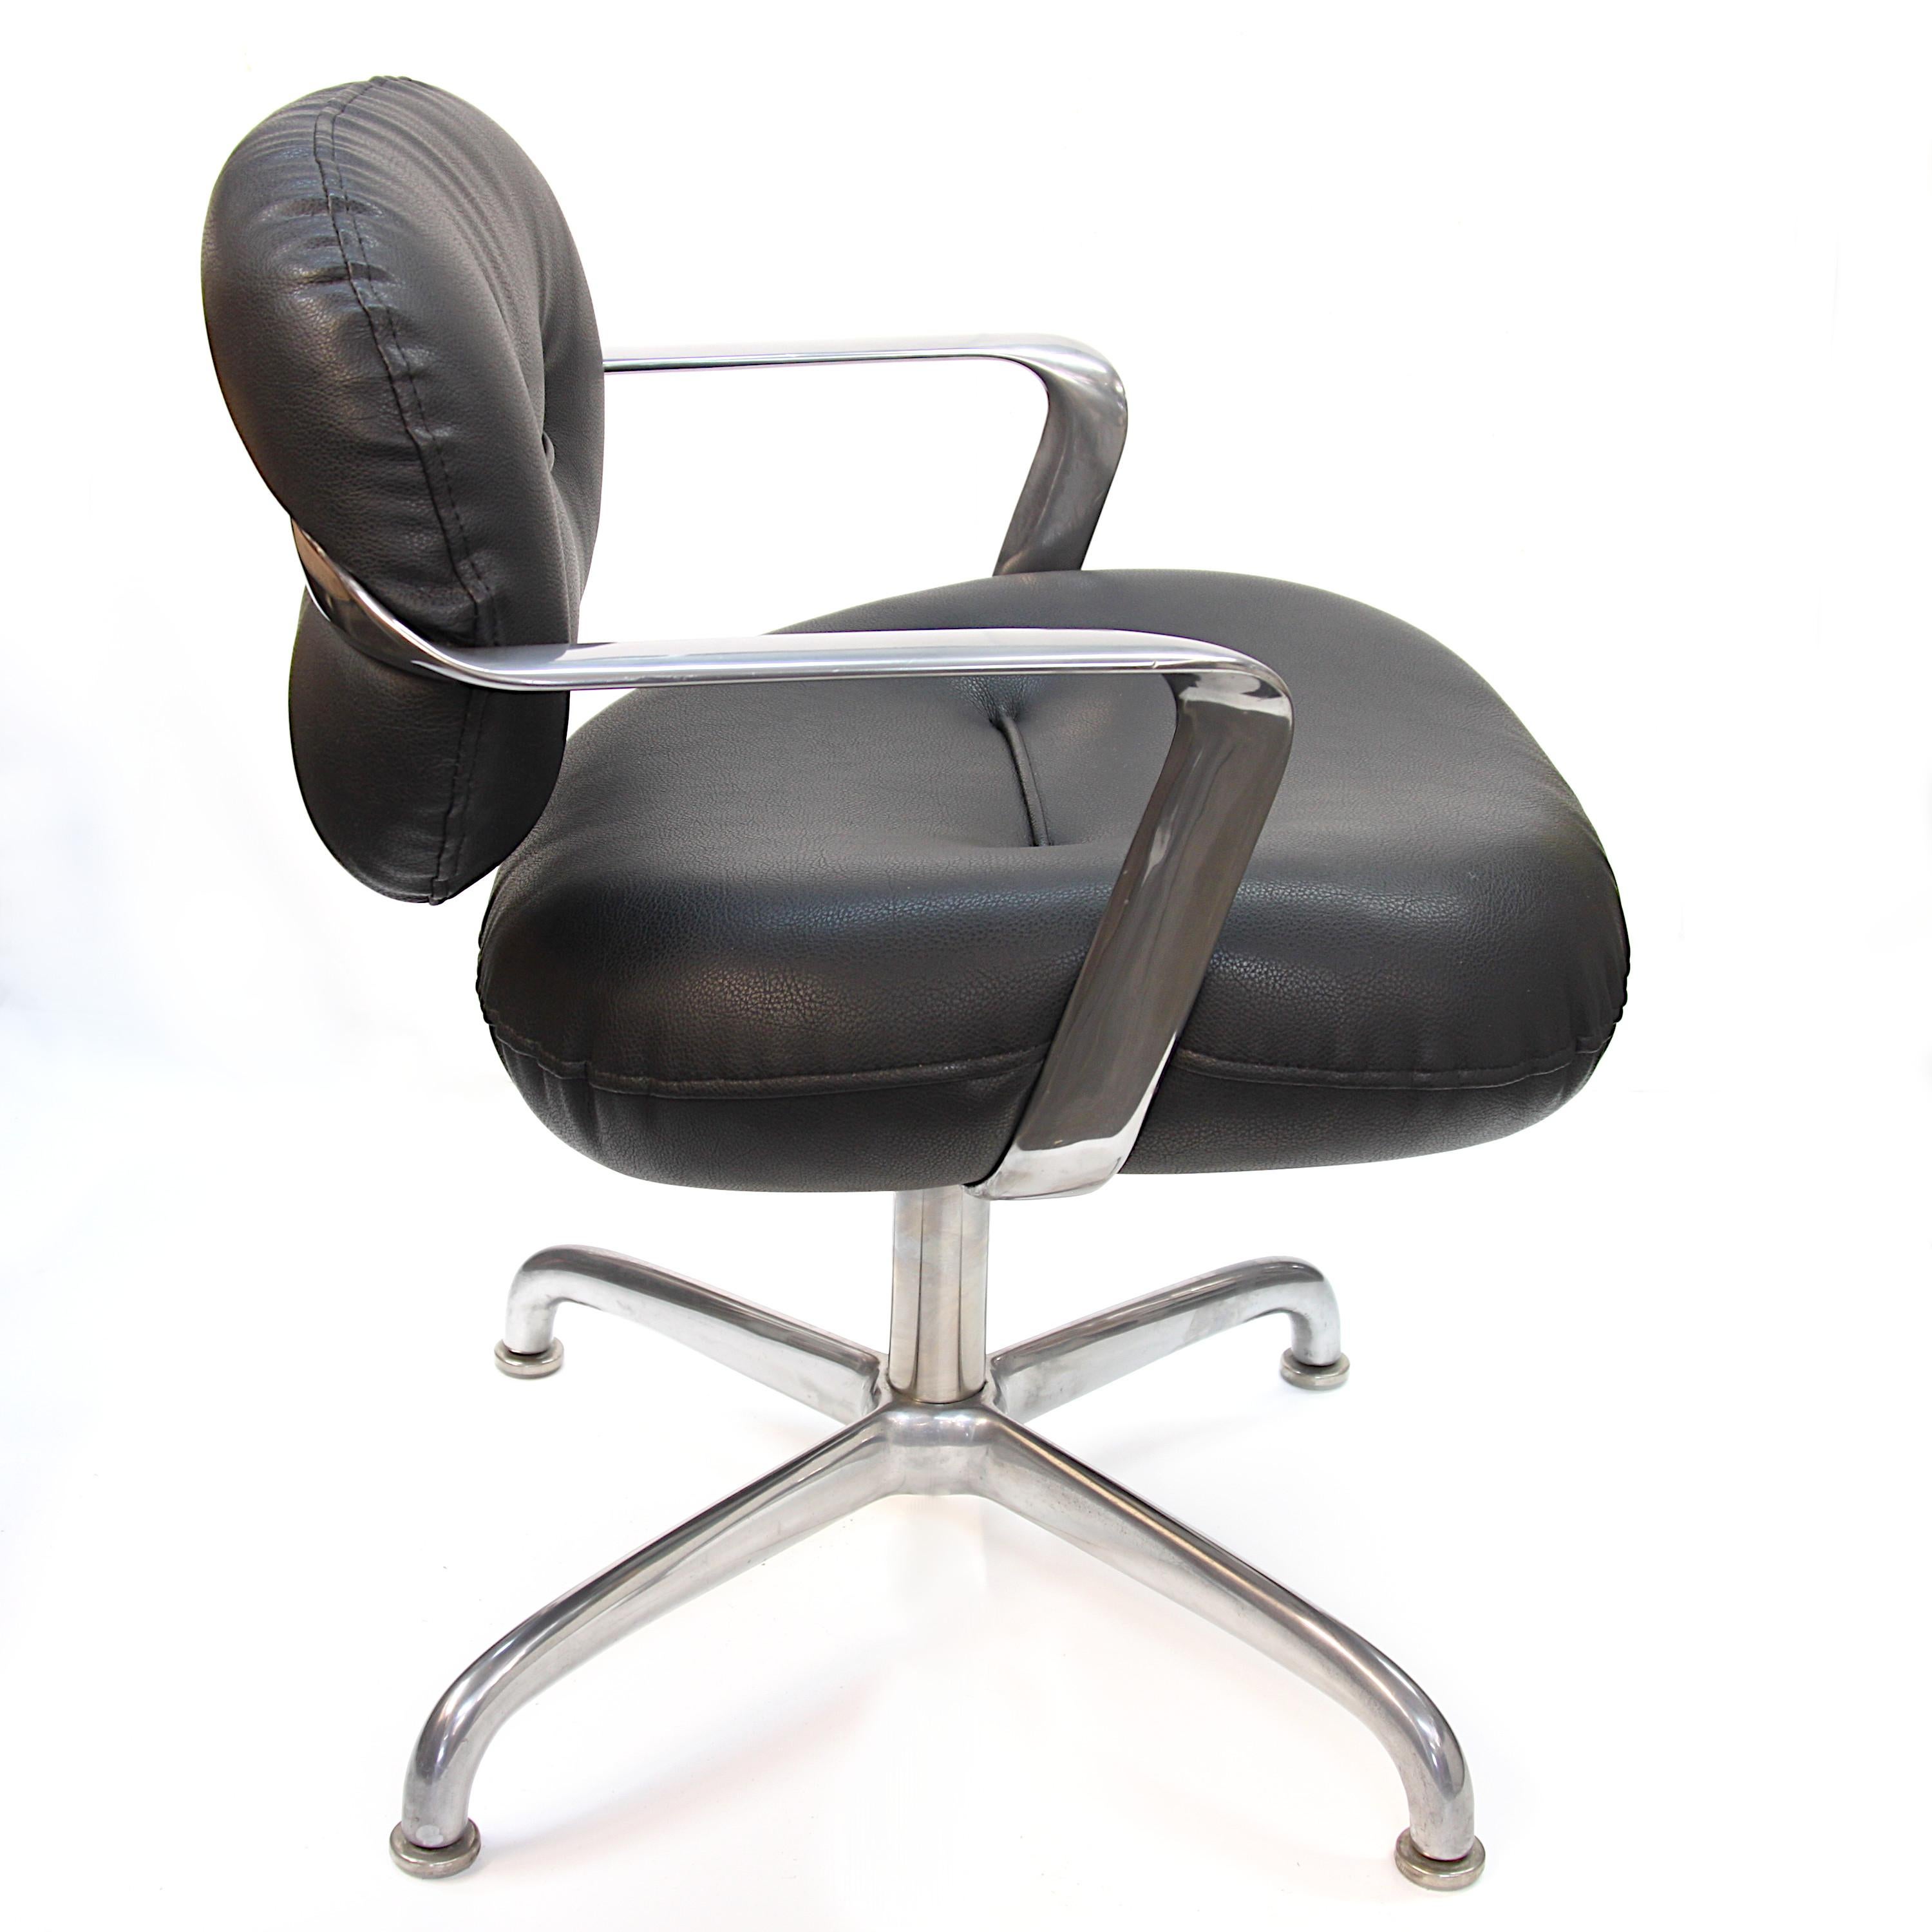 Late 20th Century Mid-Century Modern Swivel Desk Chair by Andrew Morrison & Bruce Hannah for Knoll